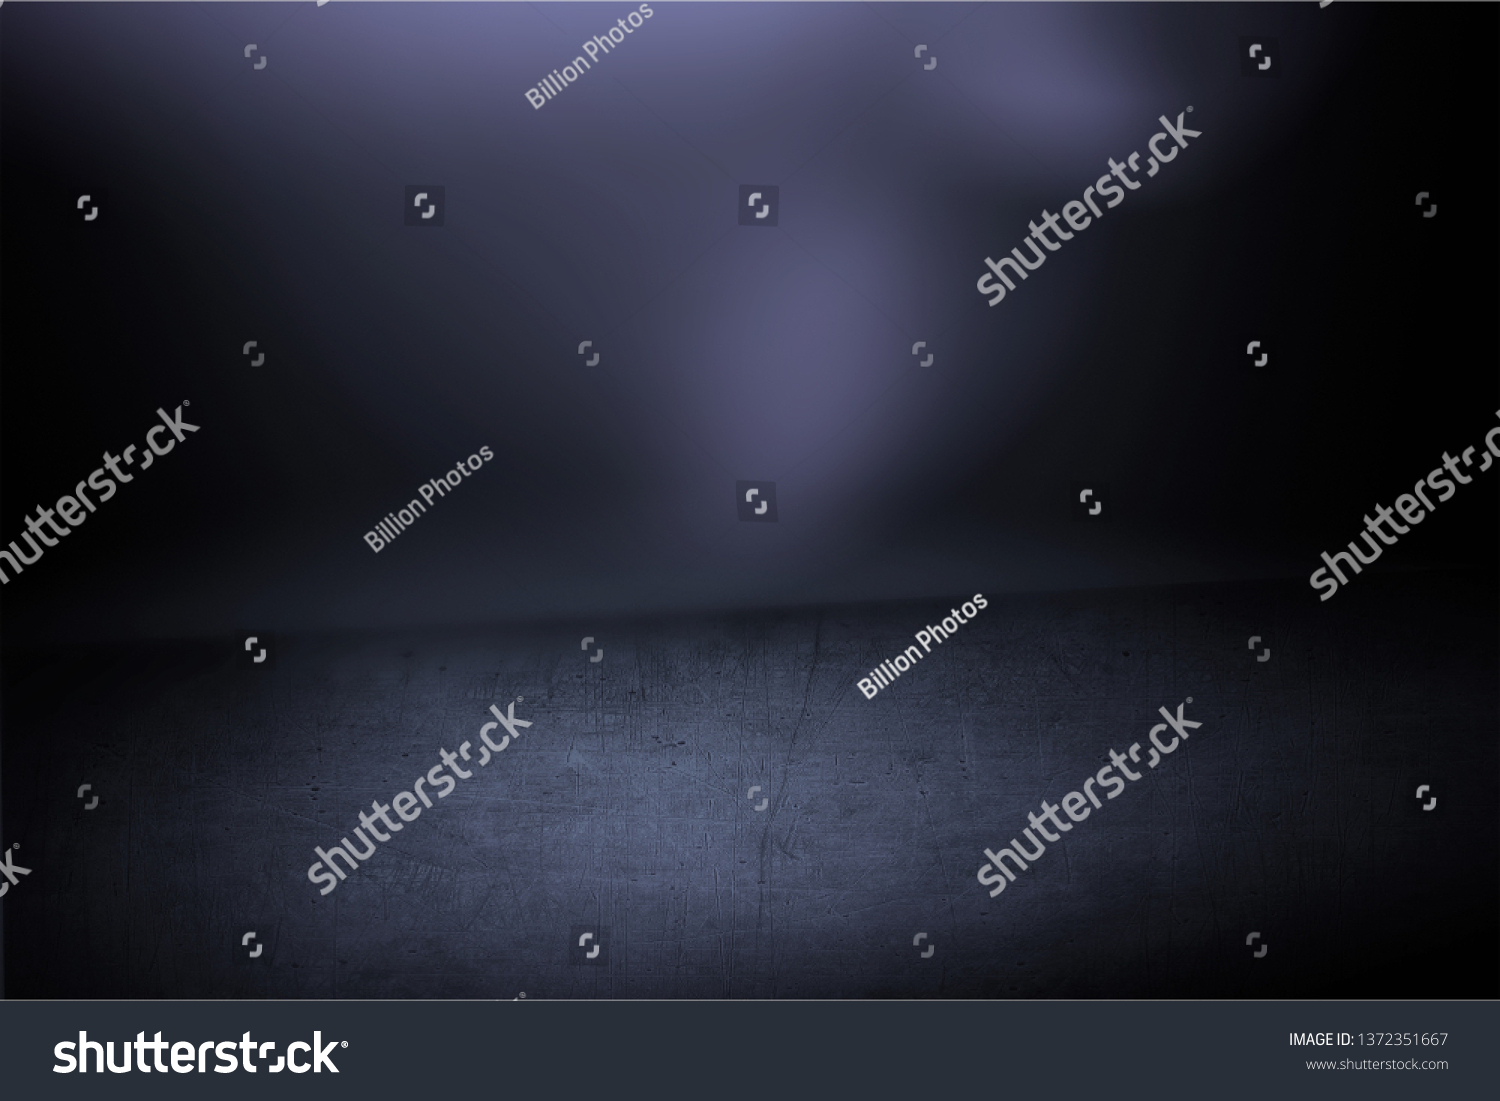 Texture dark concentrate floor with mist or fog
    
    - Image #1372351667